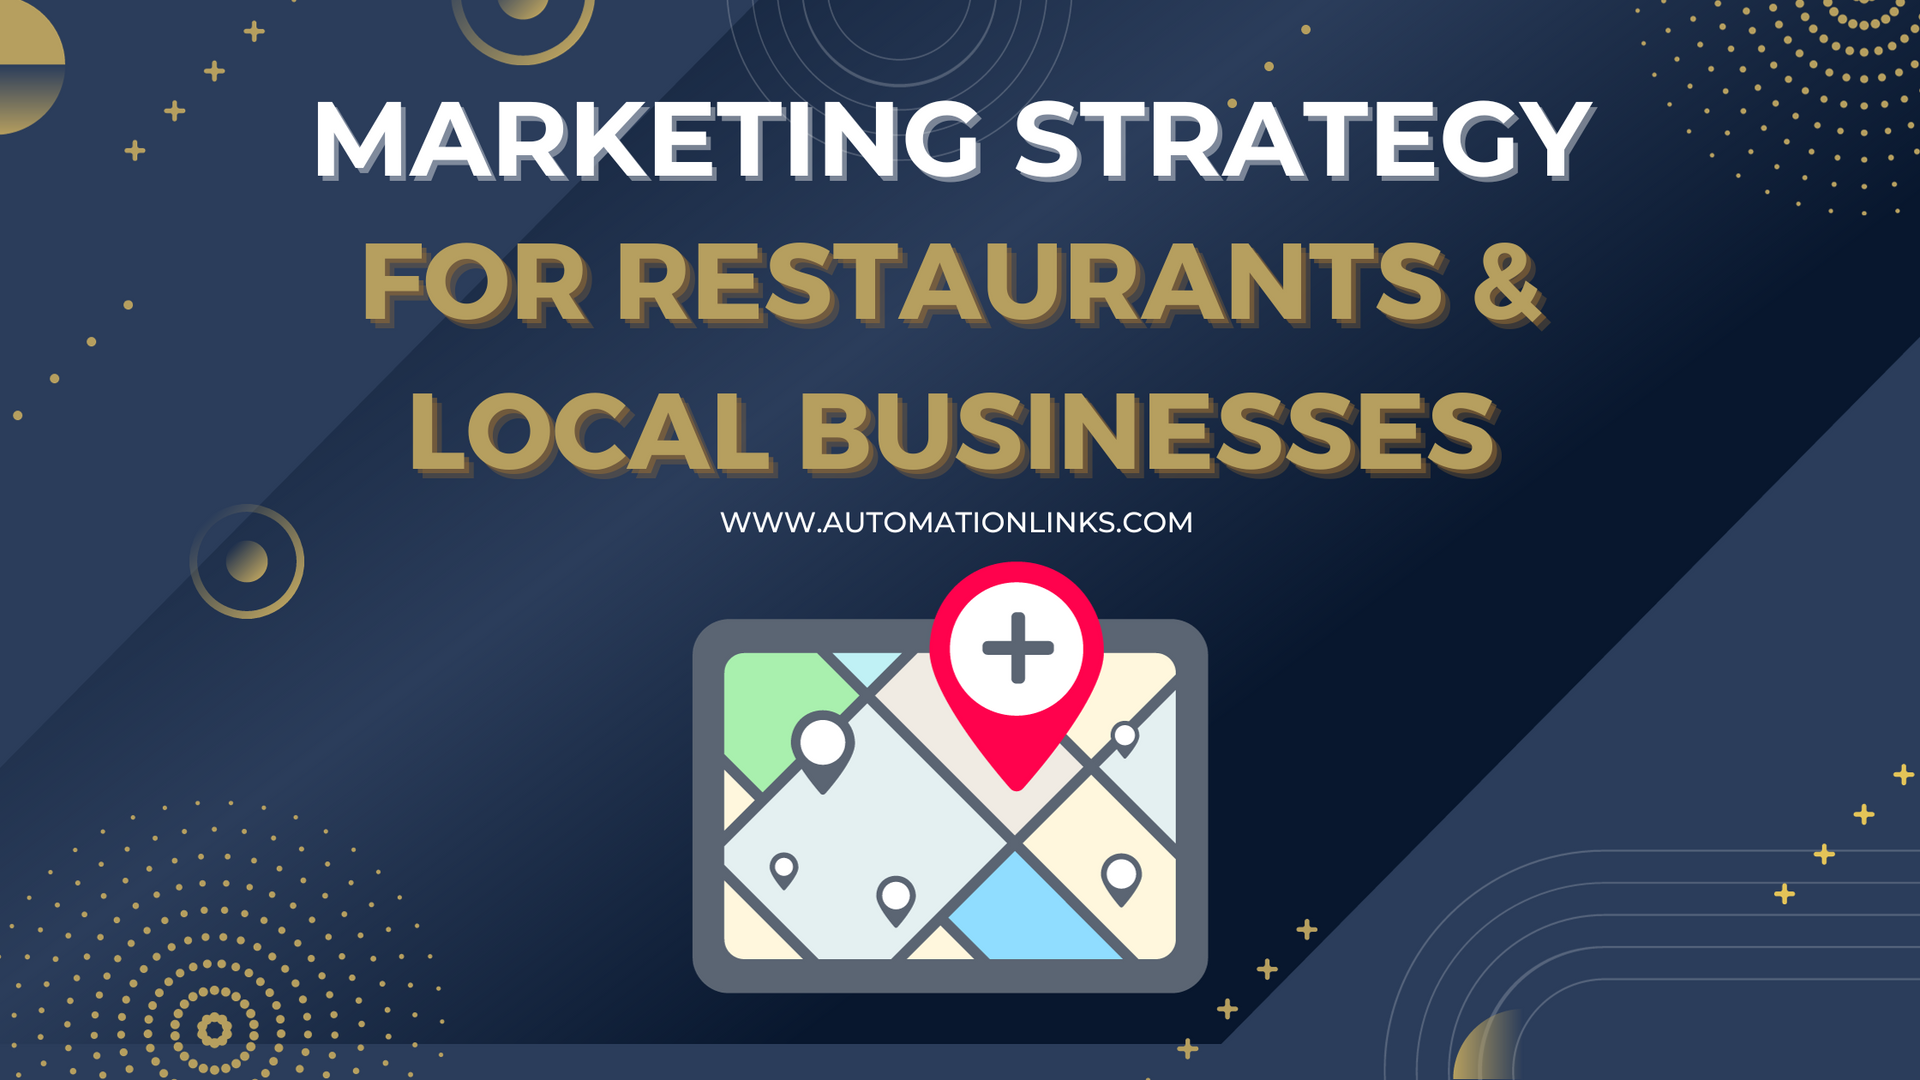 Marketing Strategy For Restaurants & Local Businesses